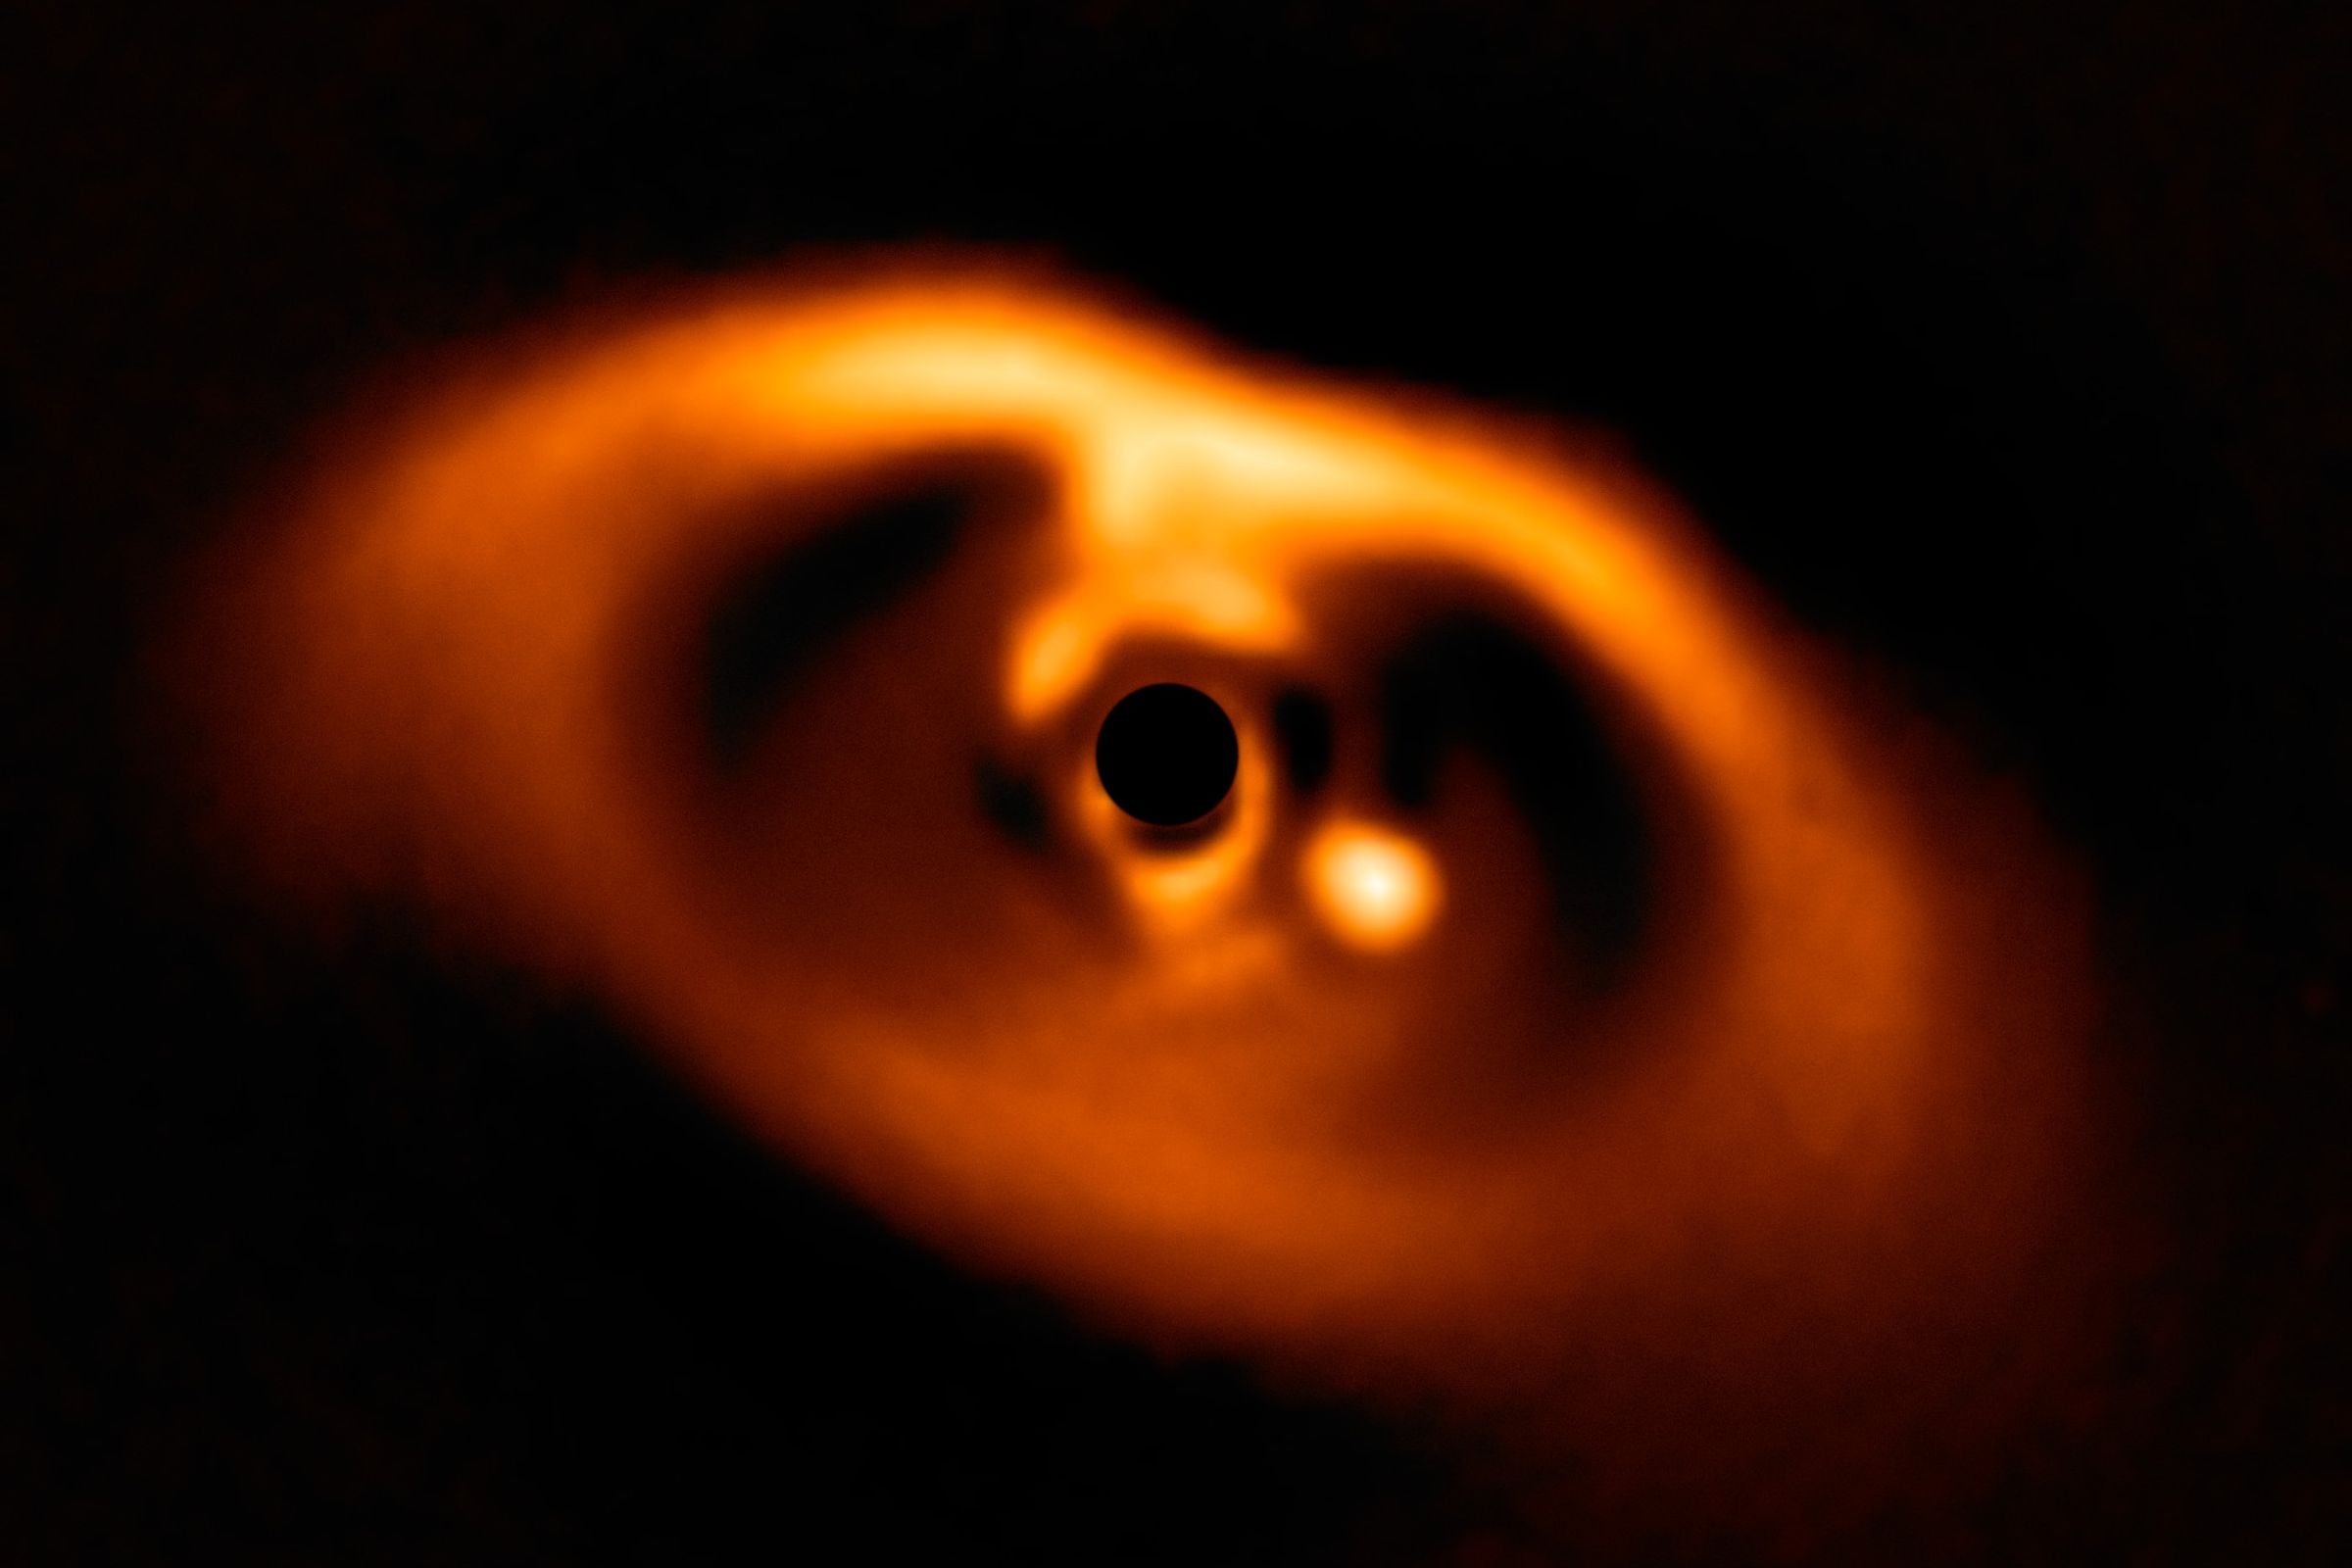 An image of the star PDS 70 and its protoplanetary disk. The new planet can be seen as a light circle to the right of the star, which has had its light block out.